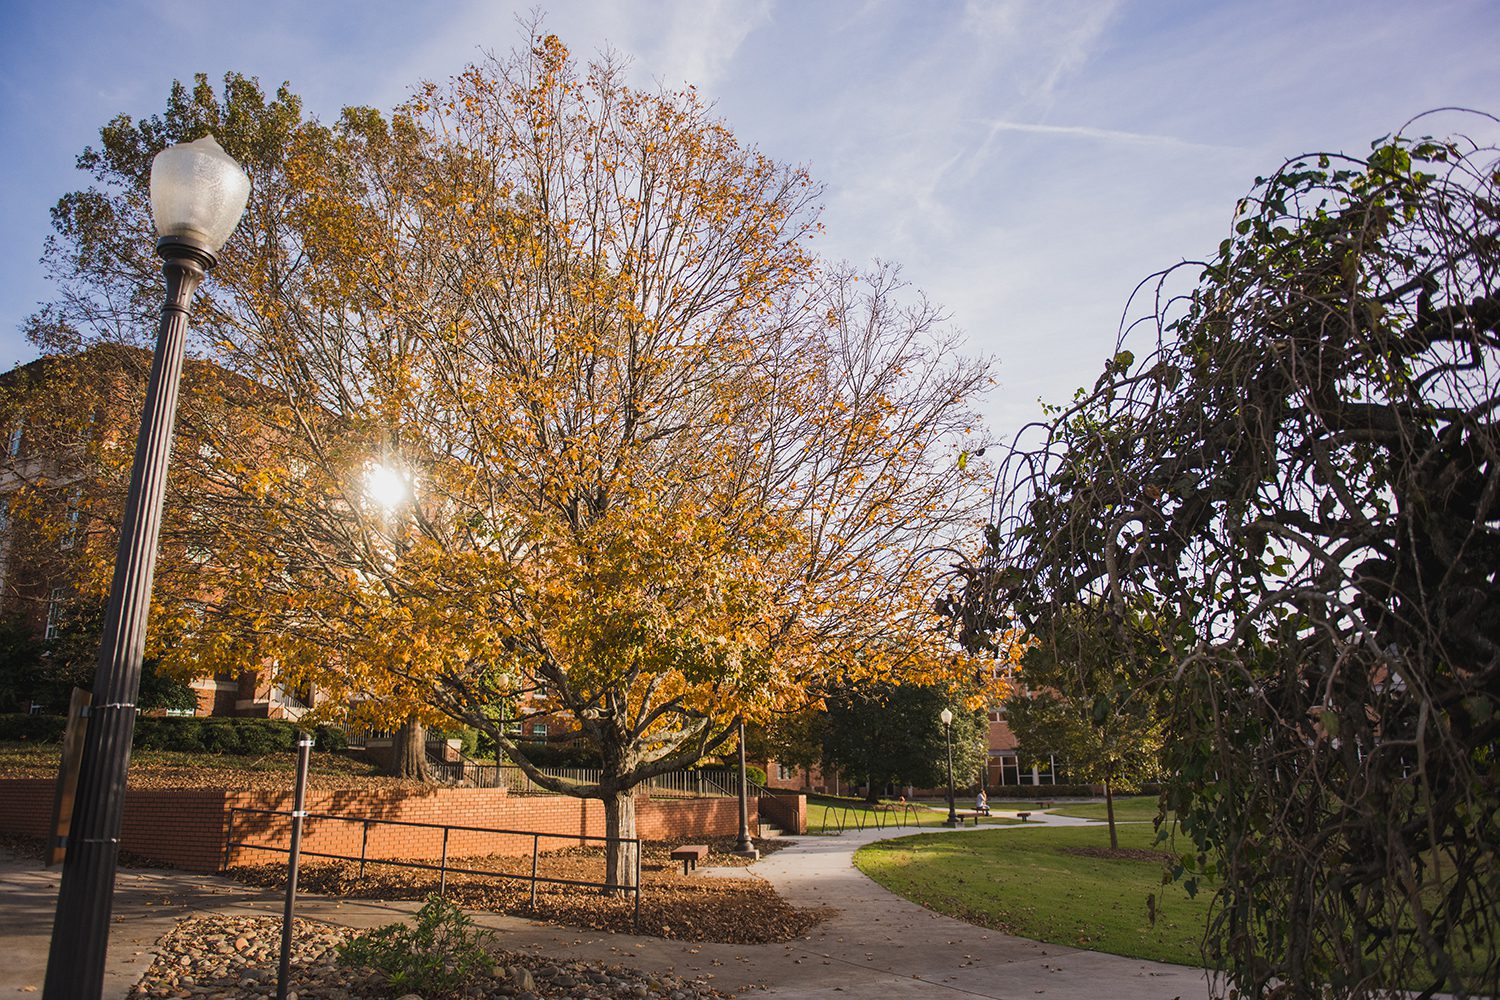 Clemson's campus in Fall 2020 with falling leaves and changing colors